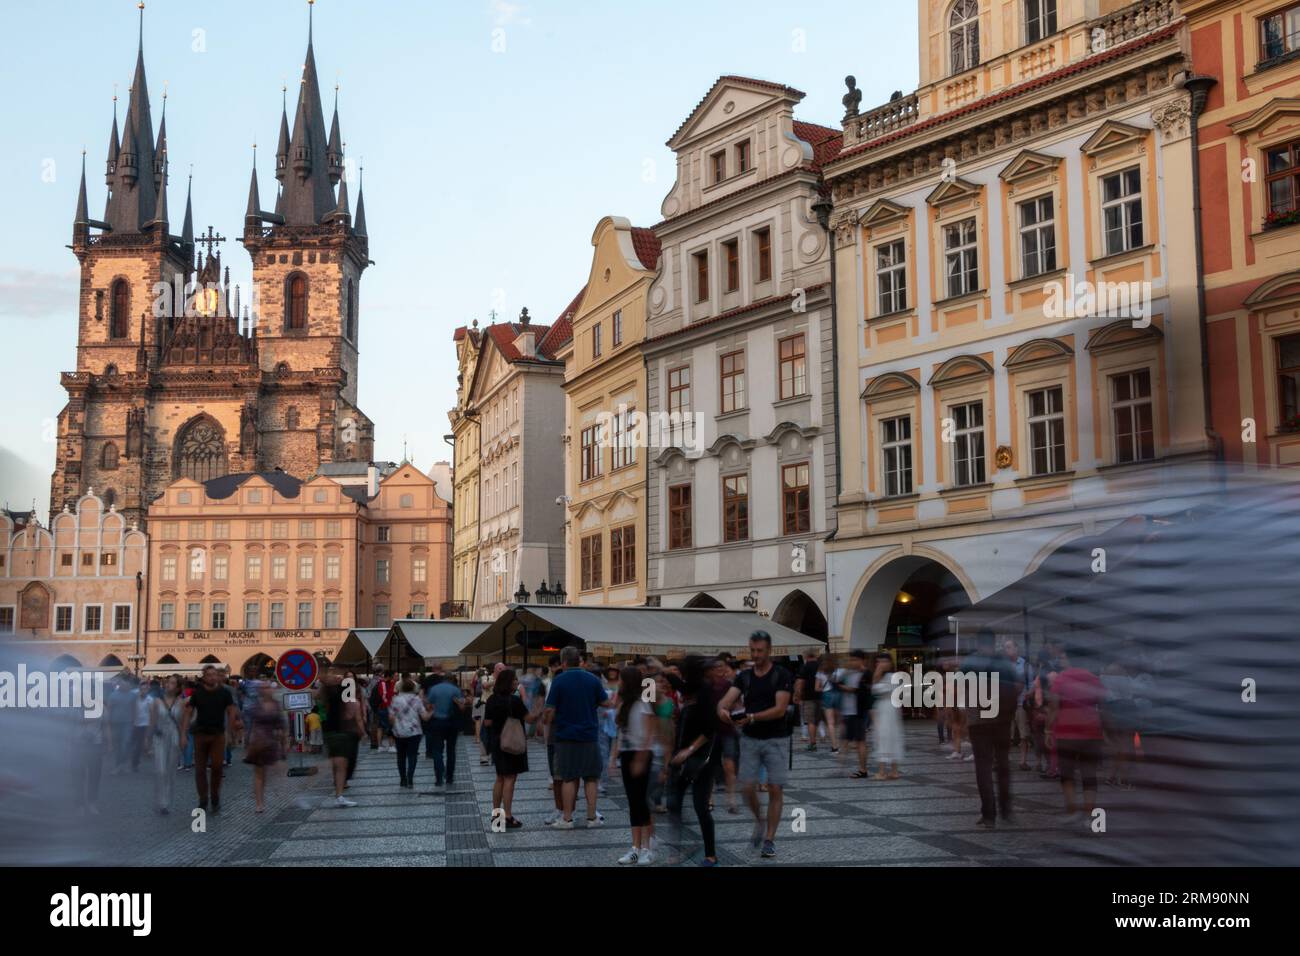 Prague, Czech Republic - August 4th 2017: Large crowd of tourists at Prague's Old Town Square in front of the beautiful Church of Our Lady before Týn Stock Photo